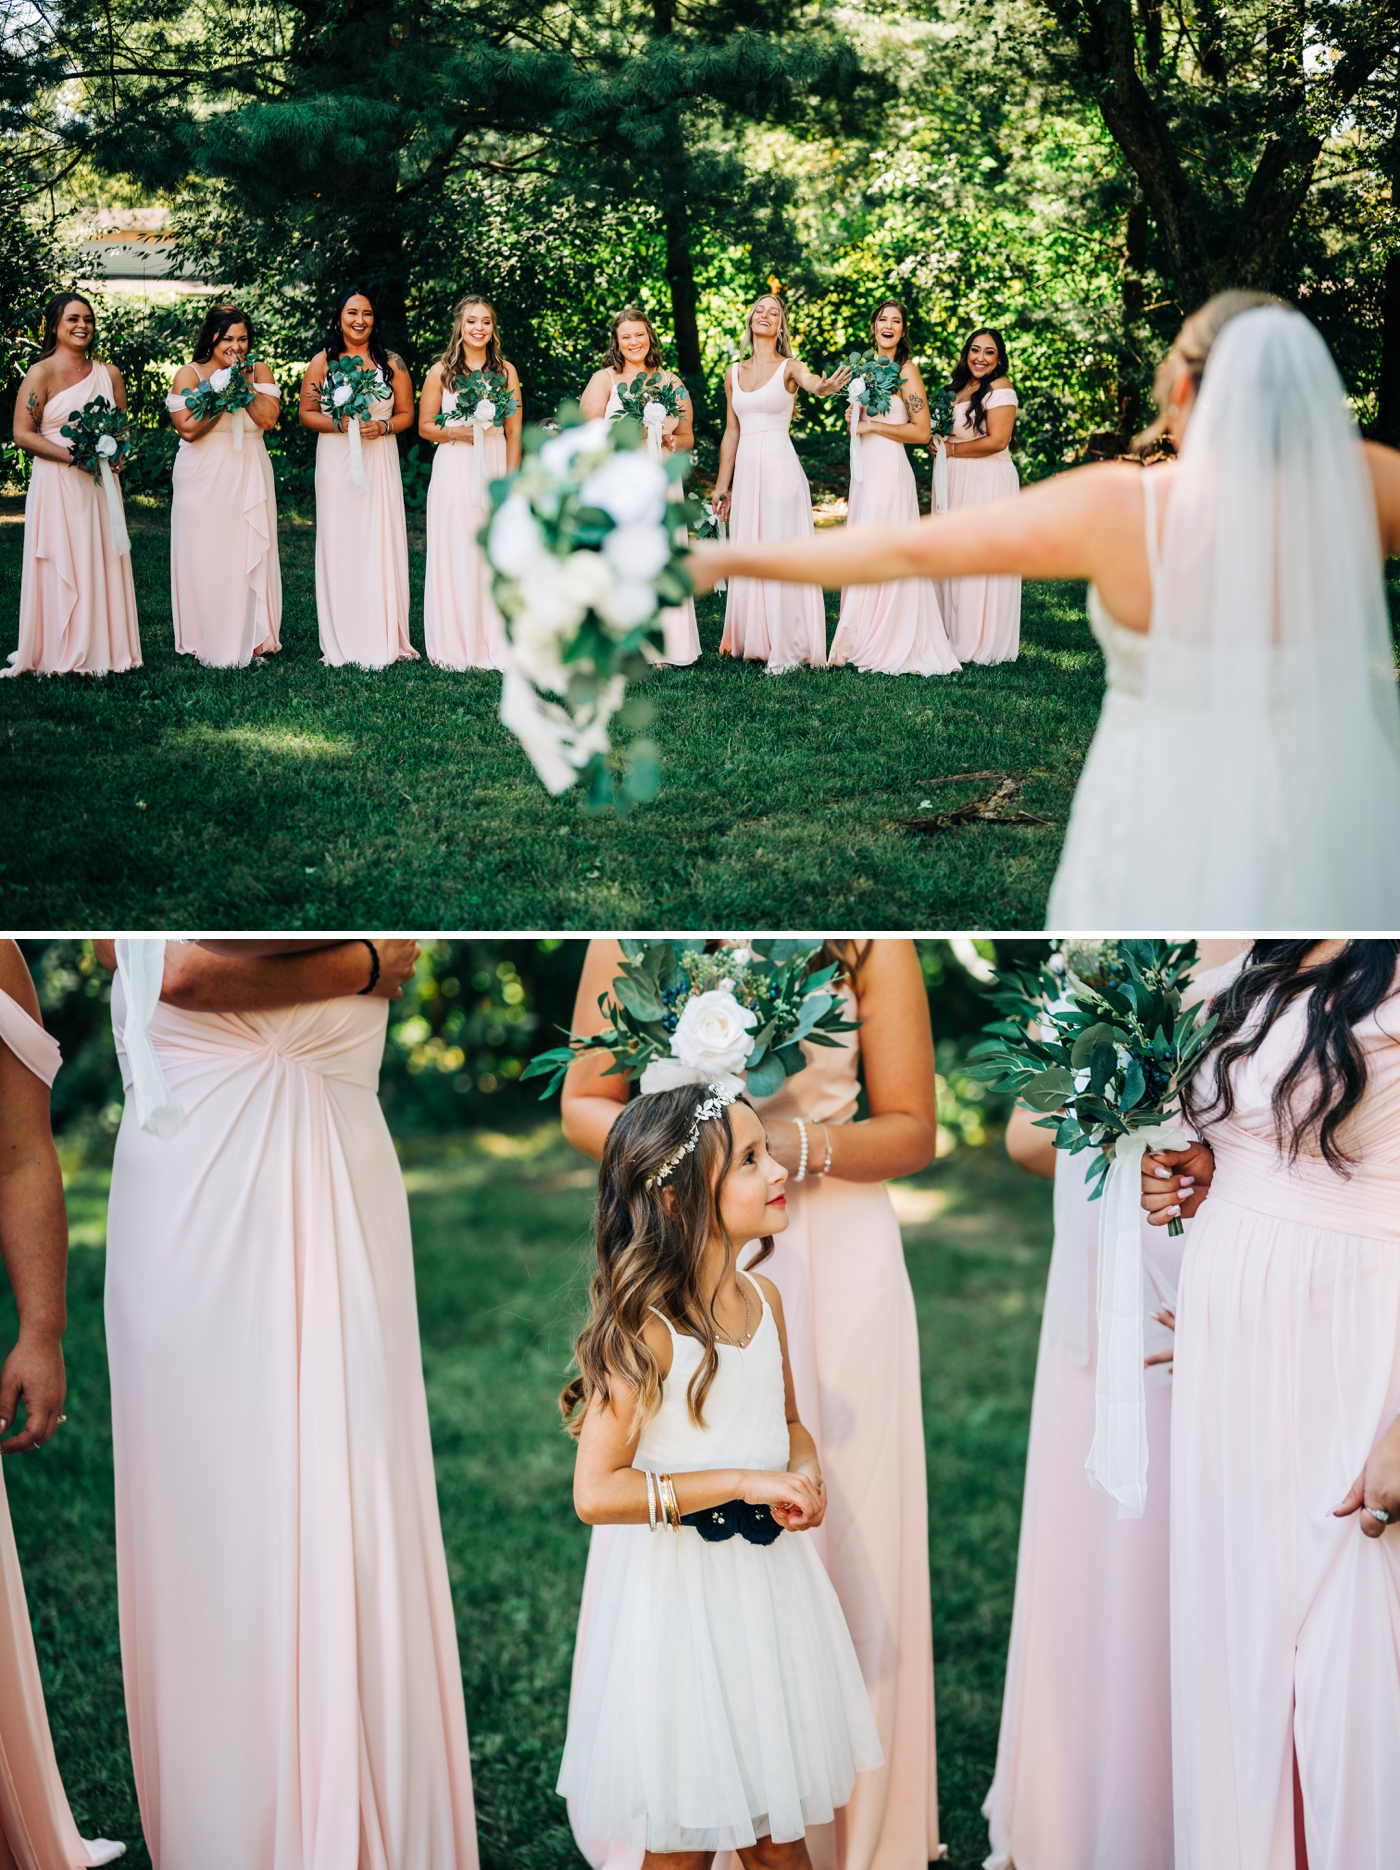 Brides first look with her bridesmaids wearing blush gowns